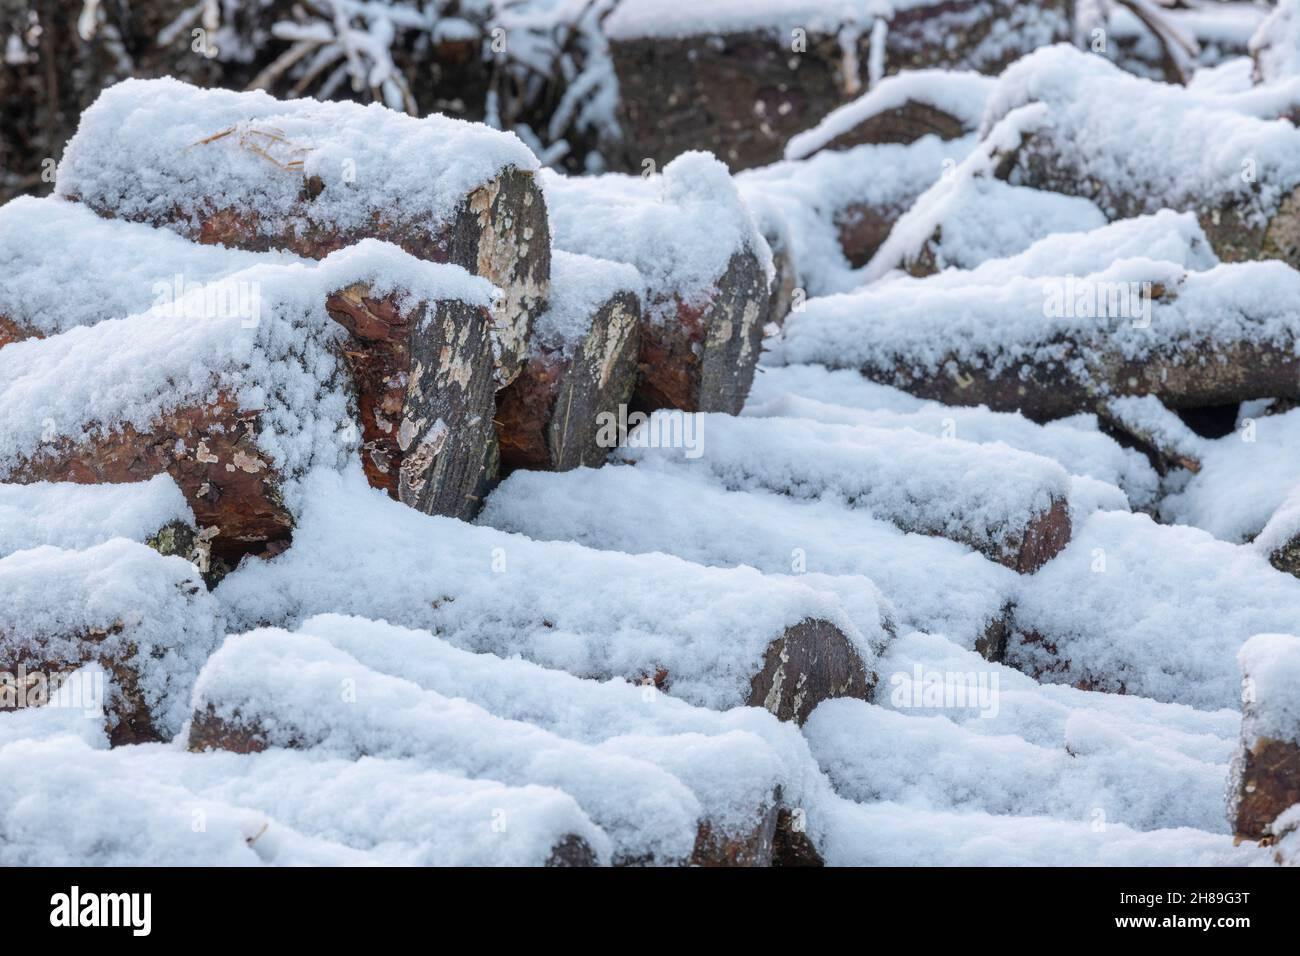 A Pile of Logs for Firewood Provides a Winter Refuge for Wildlife Stock Photo